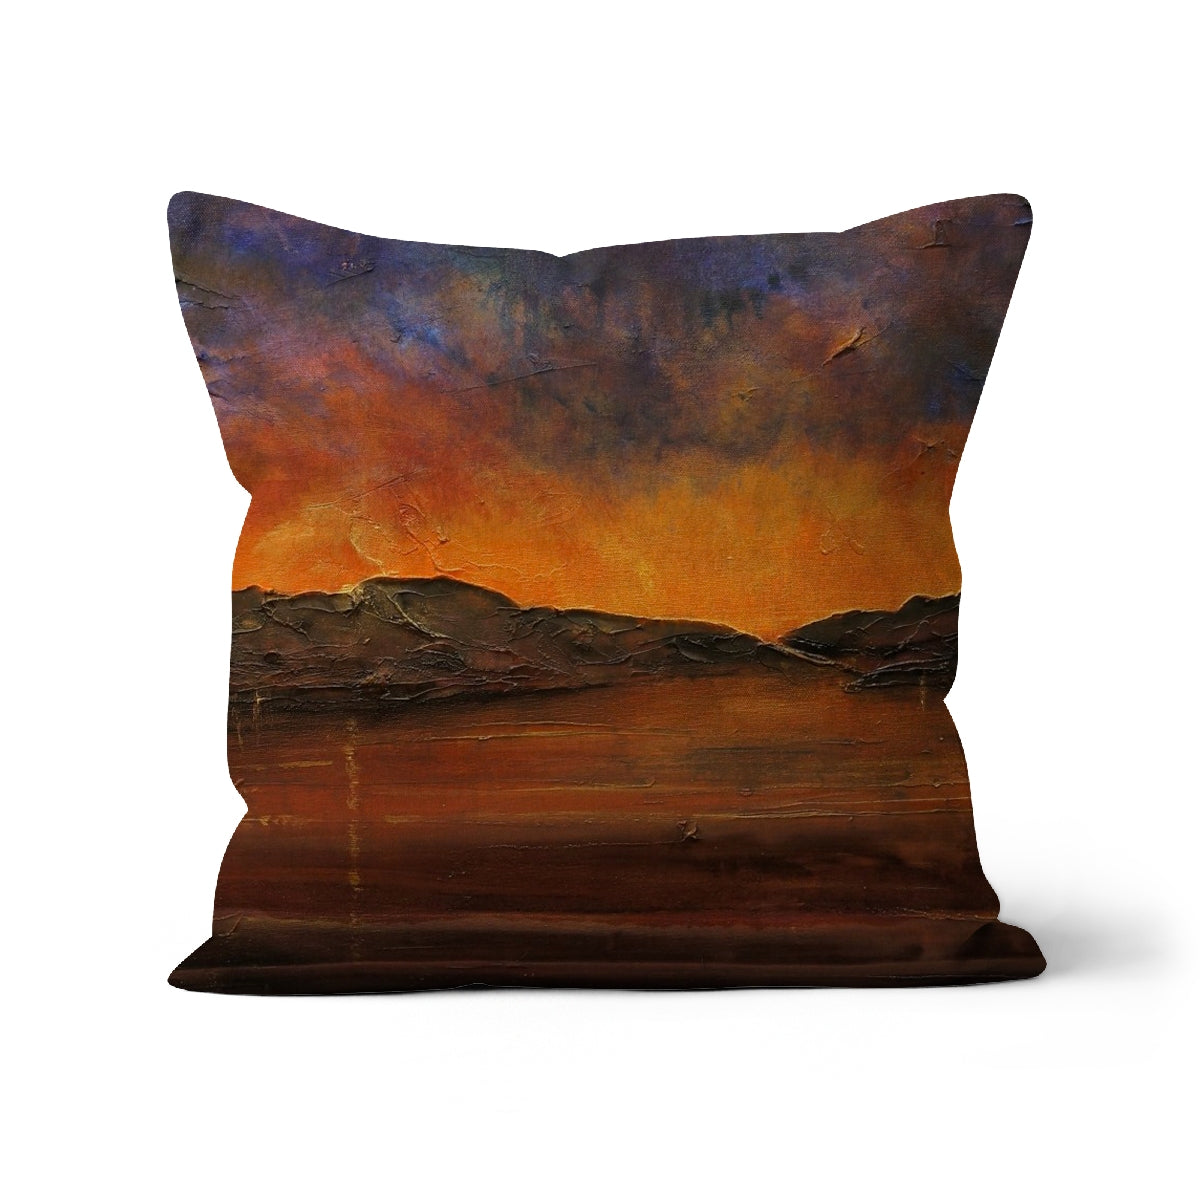 A Brooding Clyde Dusk Art Gifts Cushion-Cushions-River Clyde Art Gallery-Canvas-22"x22"-Paintings, Prints, Homeware, Art Gifts From Scotland By Scottish Artist Kevin Hunter